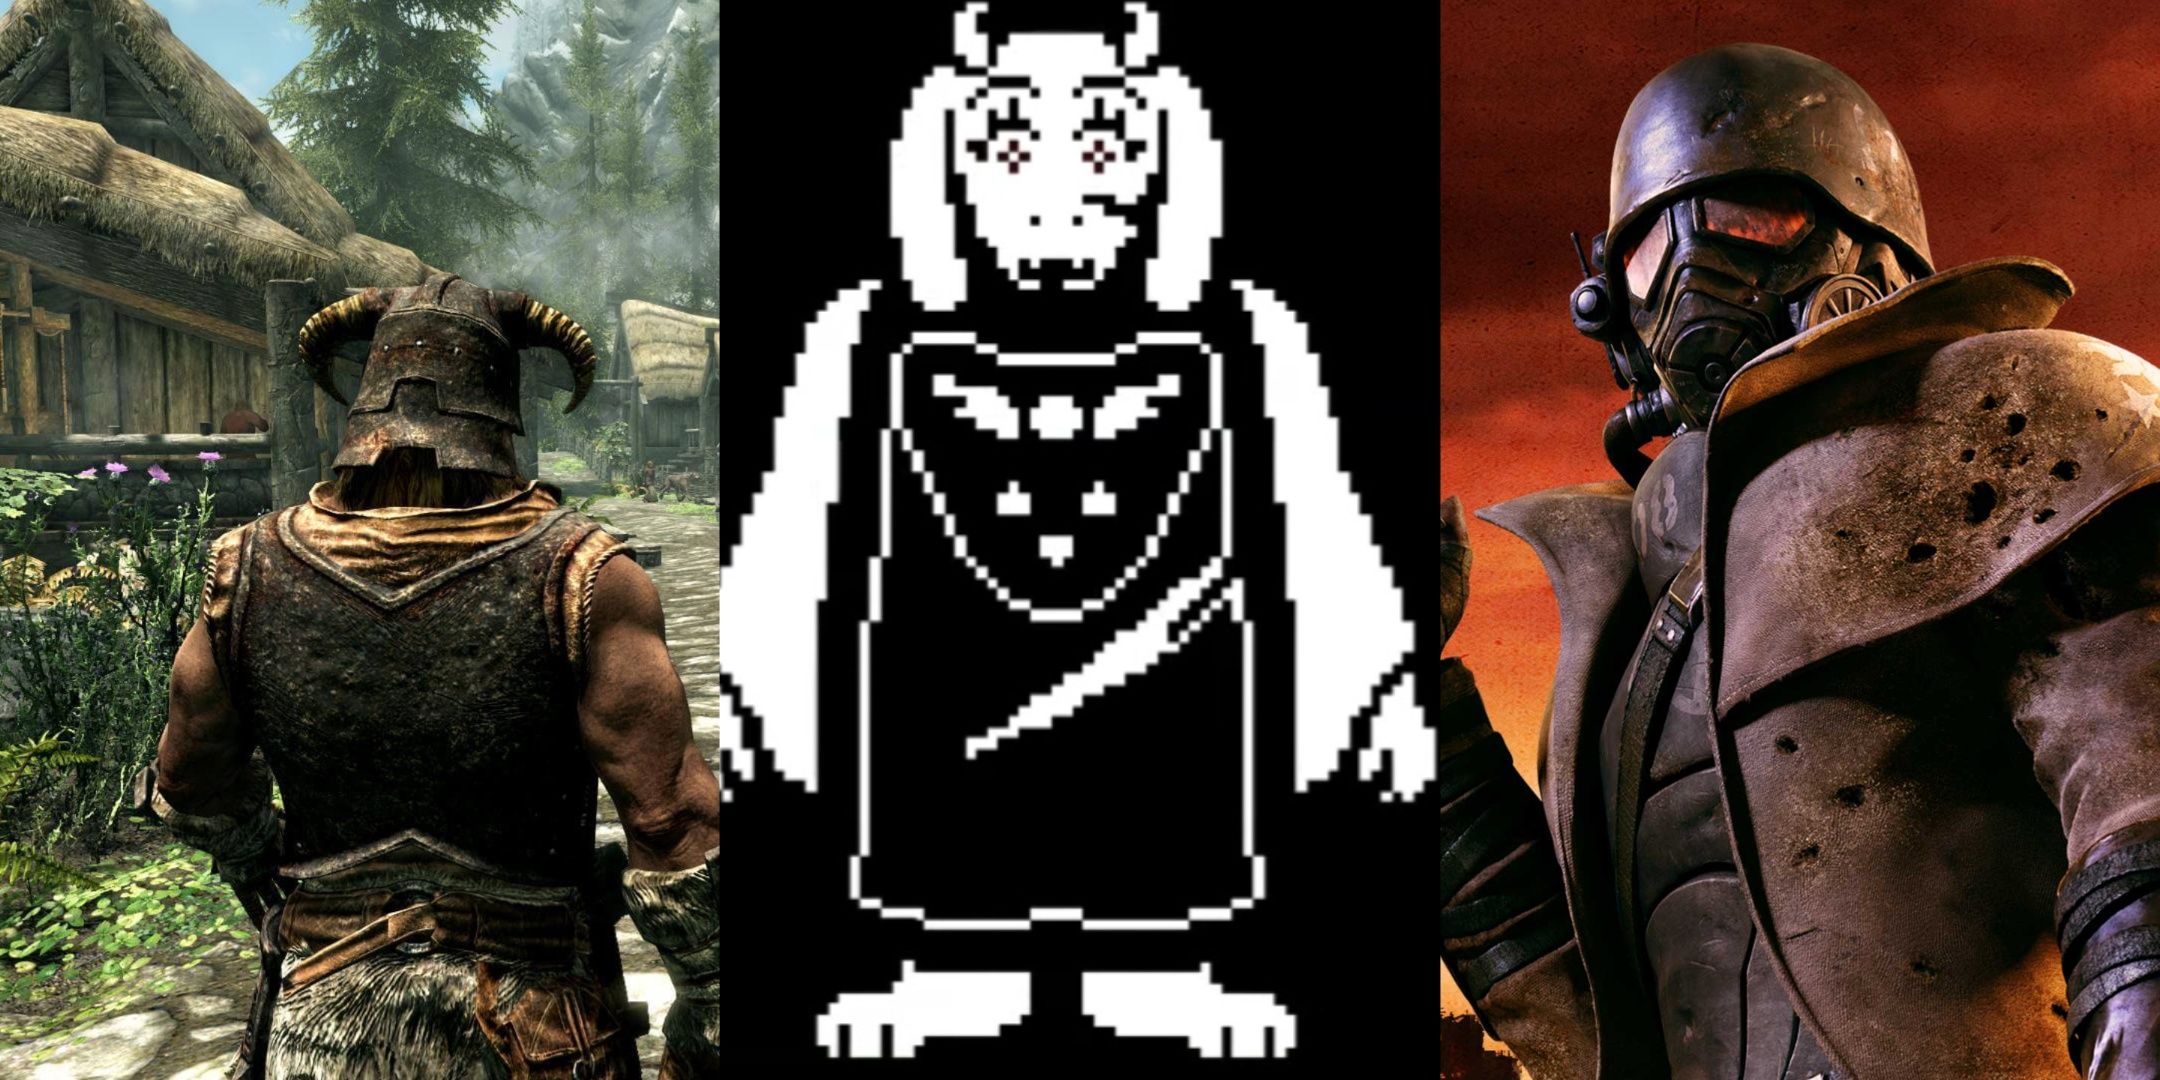 Skyrim, Undertale and Fallout New Vegas